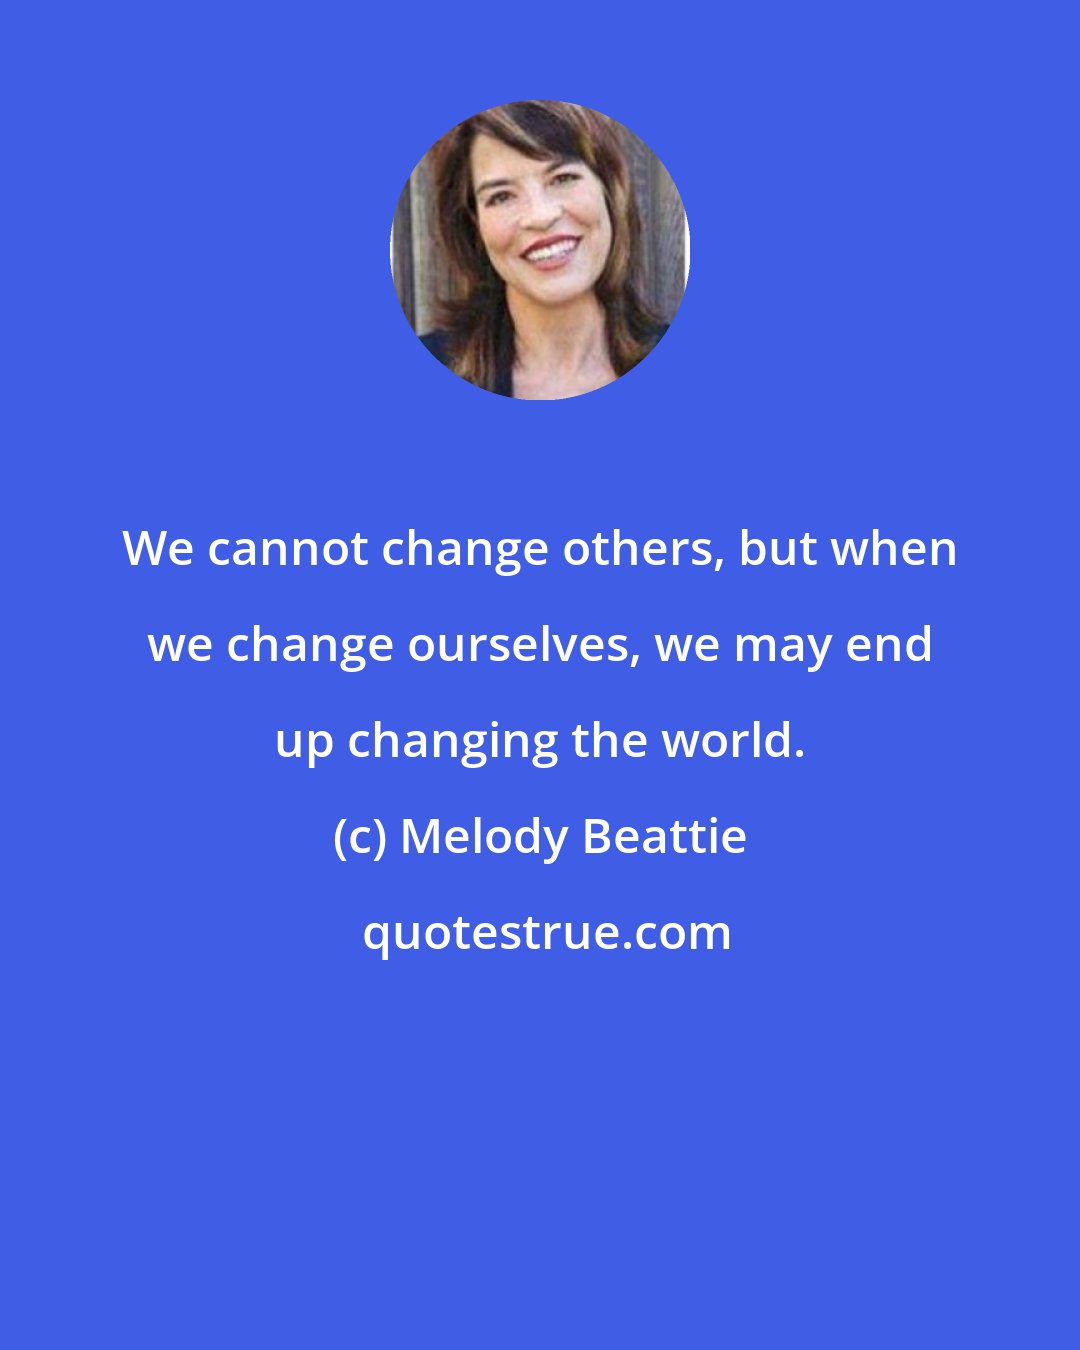 Melody Beattie: We cannot change others, but when we change ourselves, we may end up changing the world.